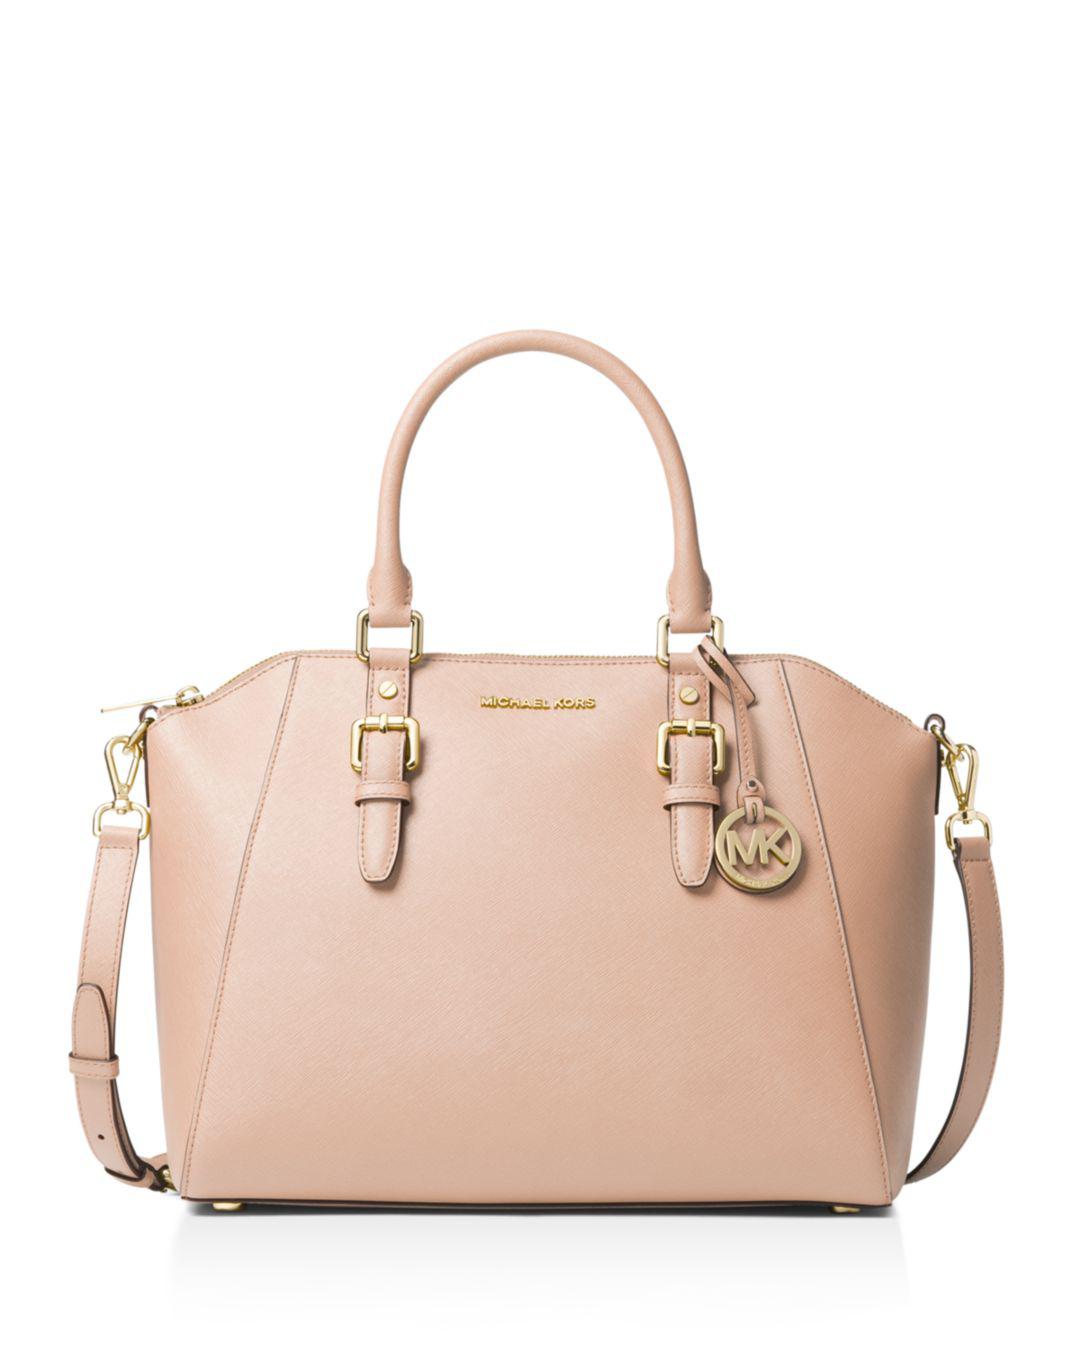 Michael Kors Ciara Large Saffiano Leather Satchel in Pink | Lyst